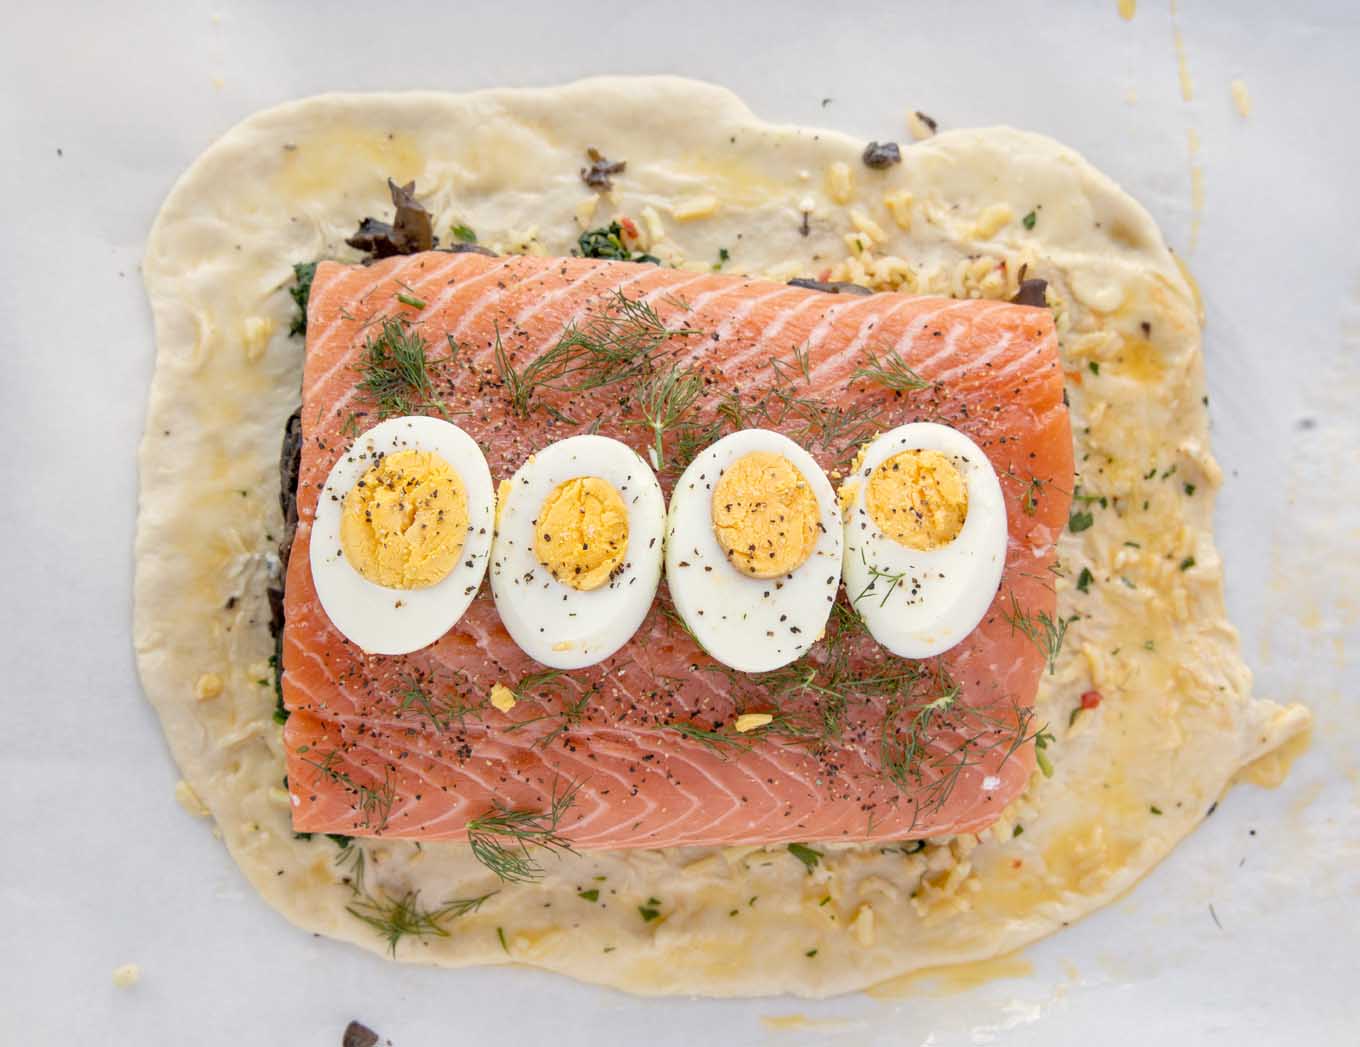 slices of hard cooked egg on top of the seasoned salmon layer of the Coulibiac of Salmon